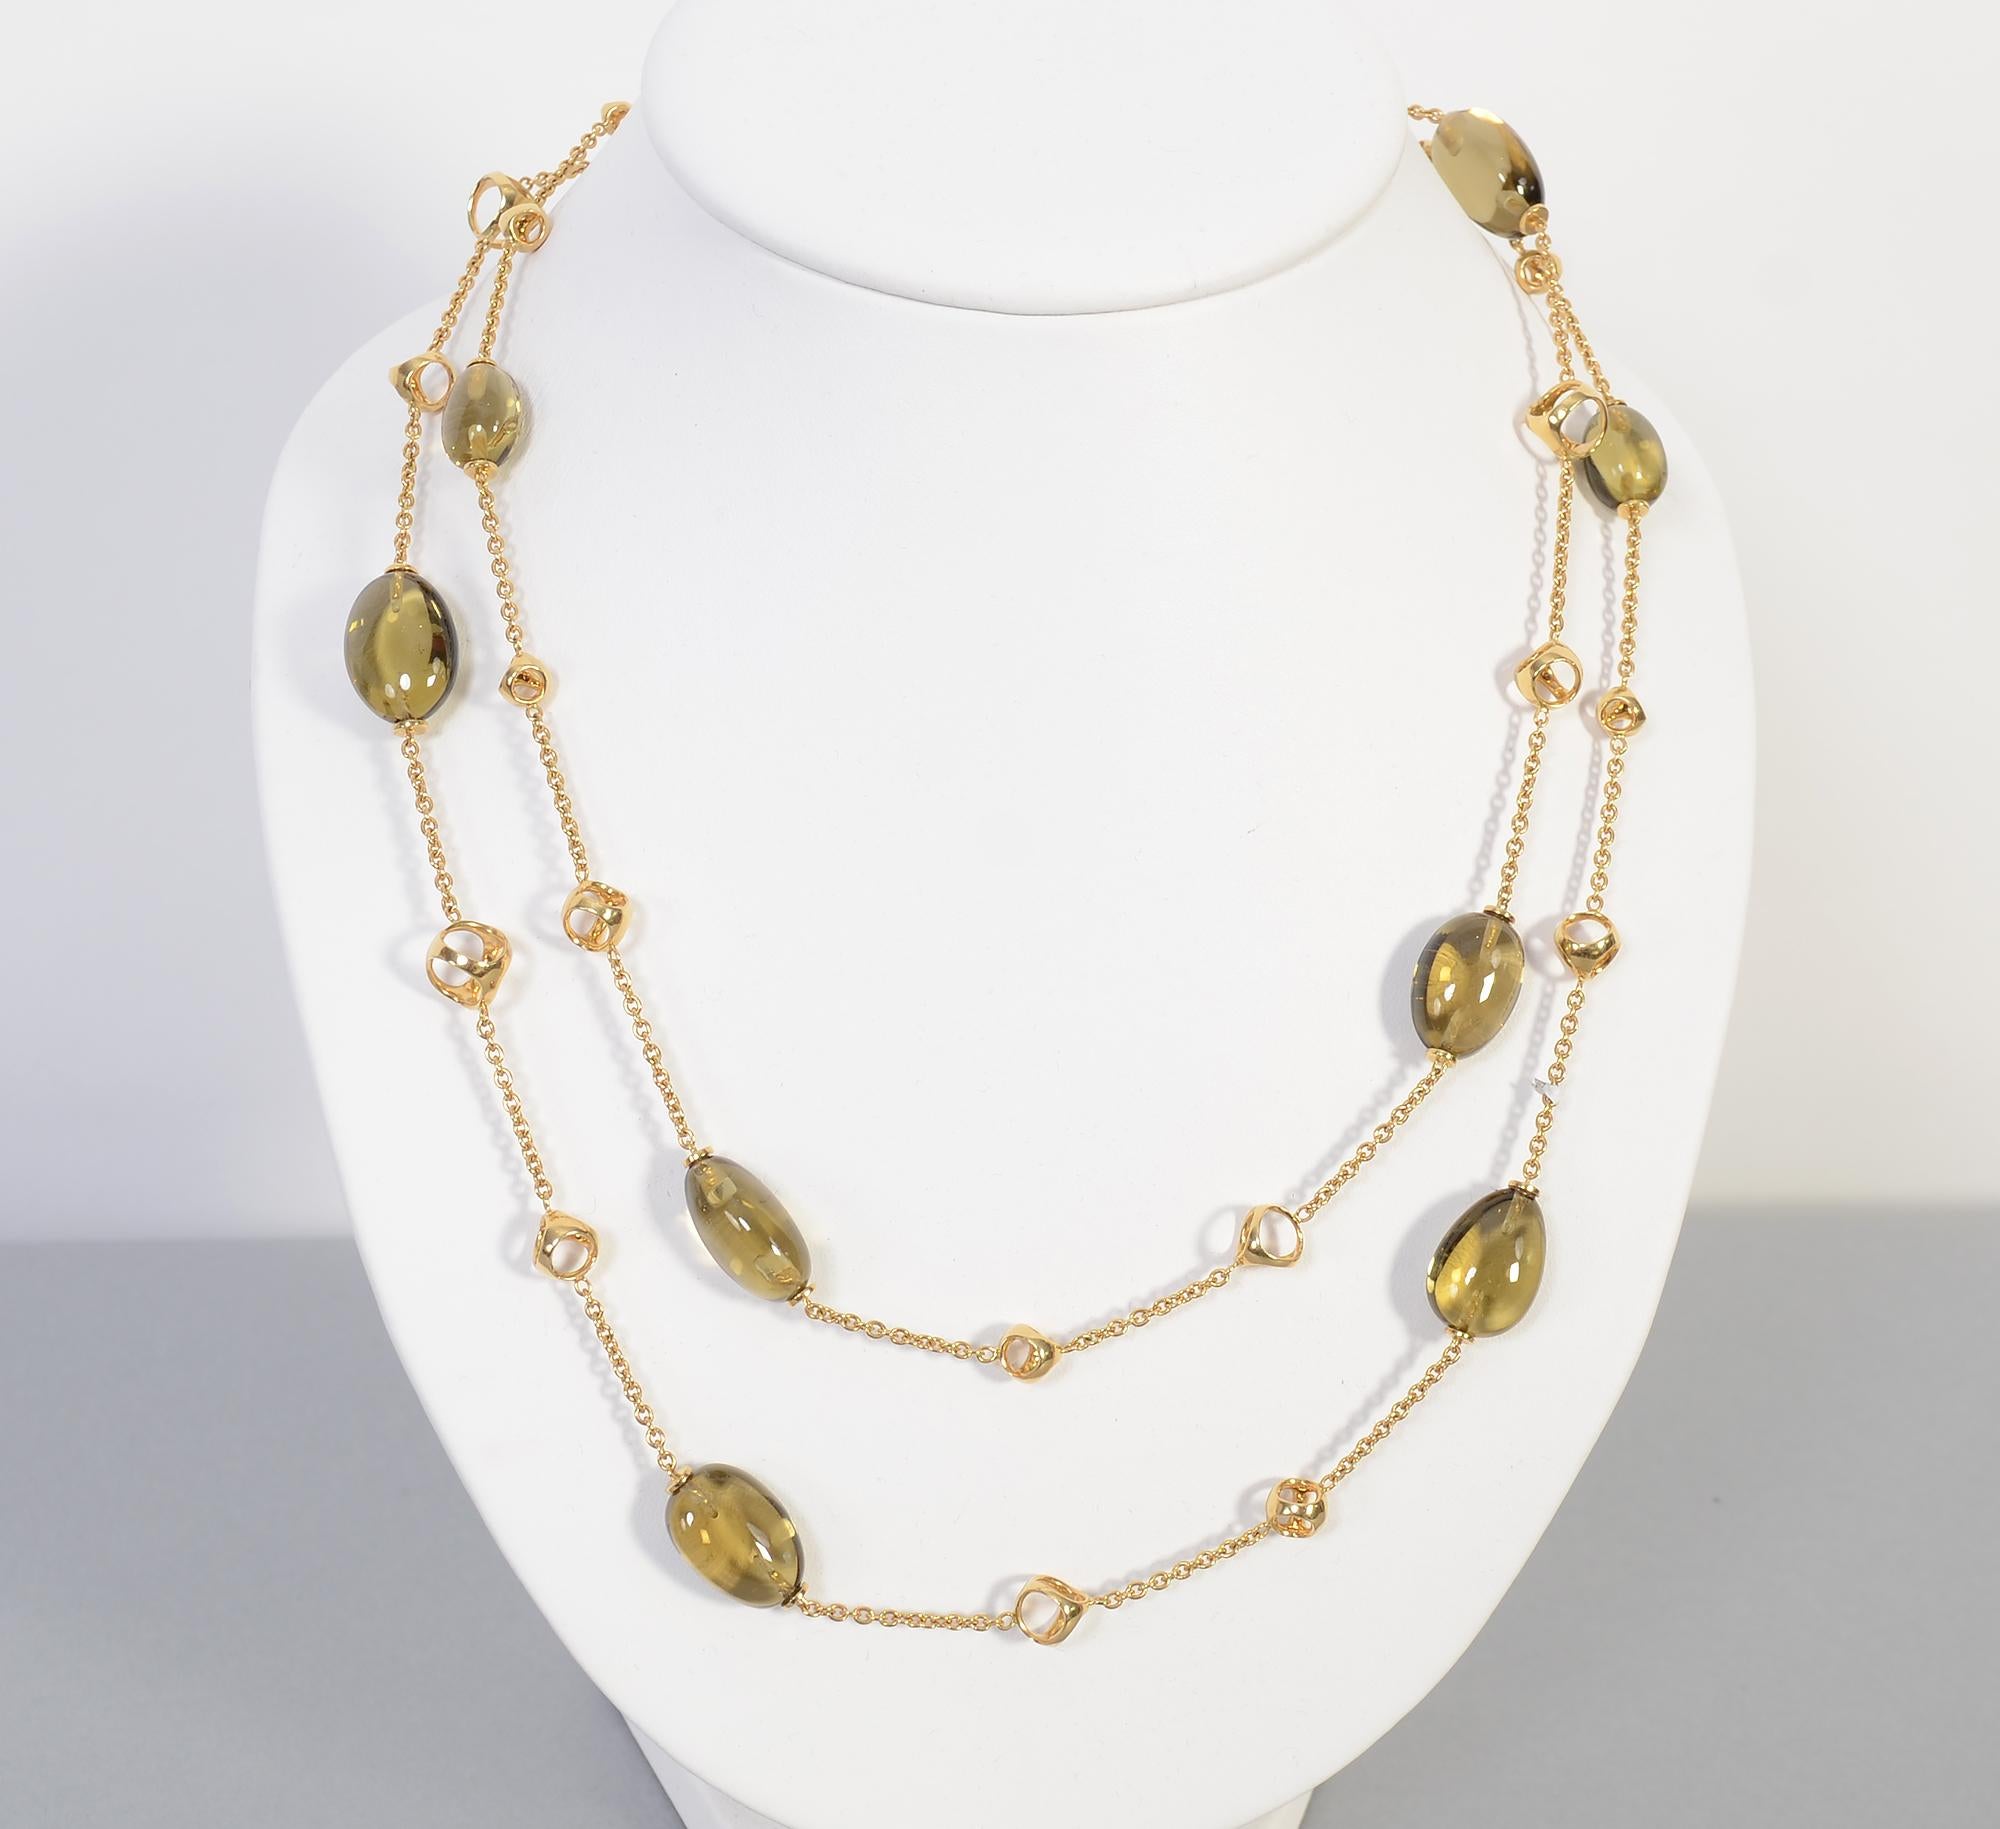 Fashionable and unusual 18 karat gold chain necklace with egg shaped citrines. The stones have a greenish tone.  Alternating with the citrines are graduated size open triangular gold links. The necklace measures 41 inches long. It has a clasp so it